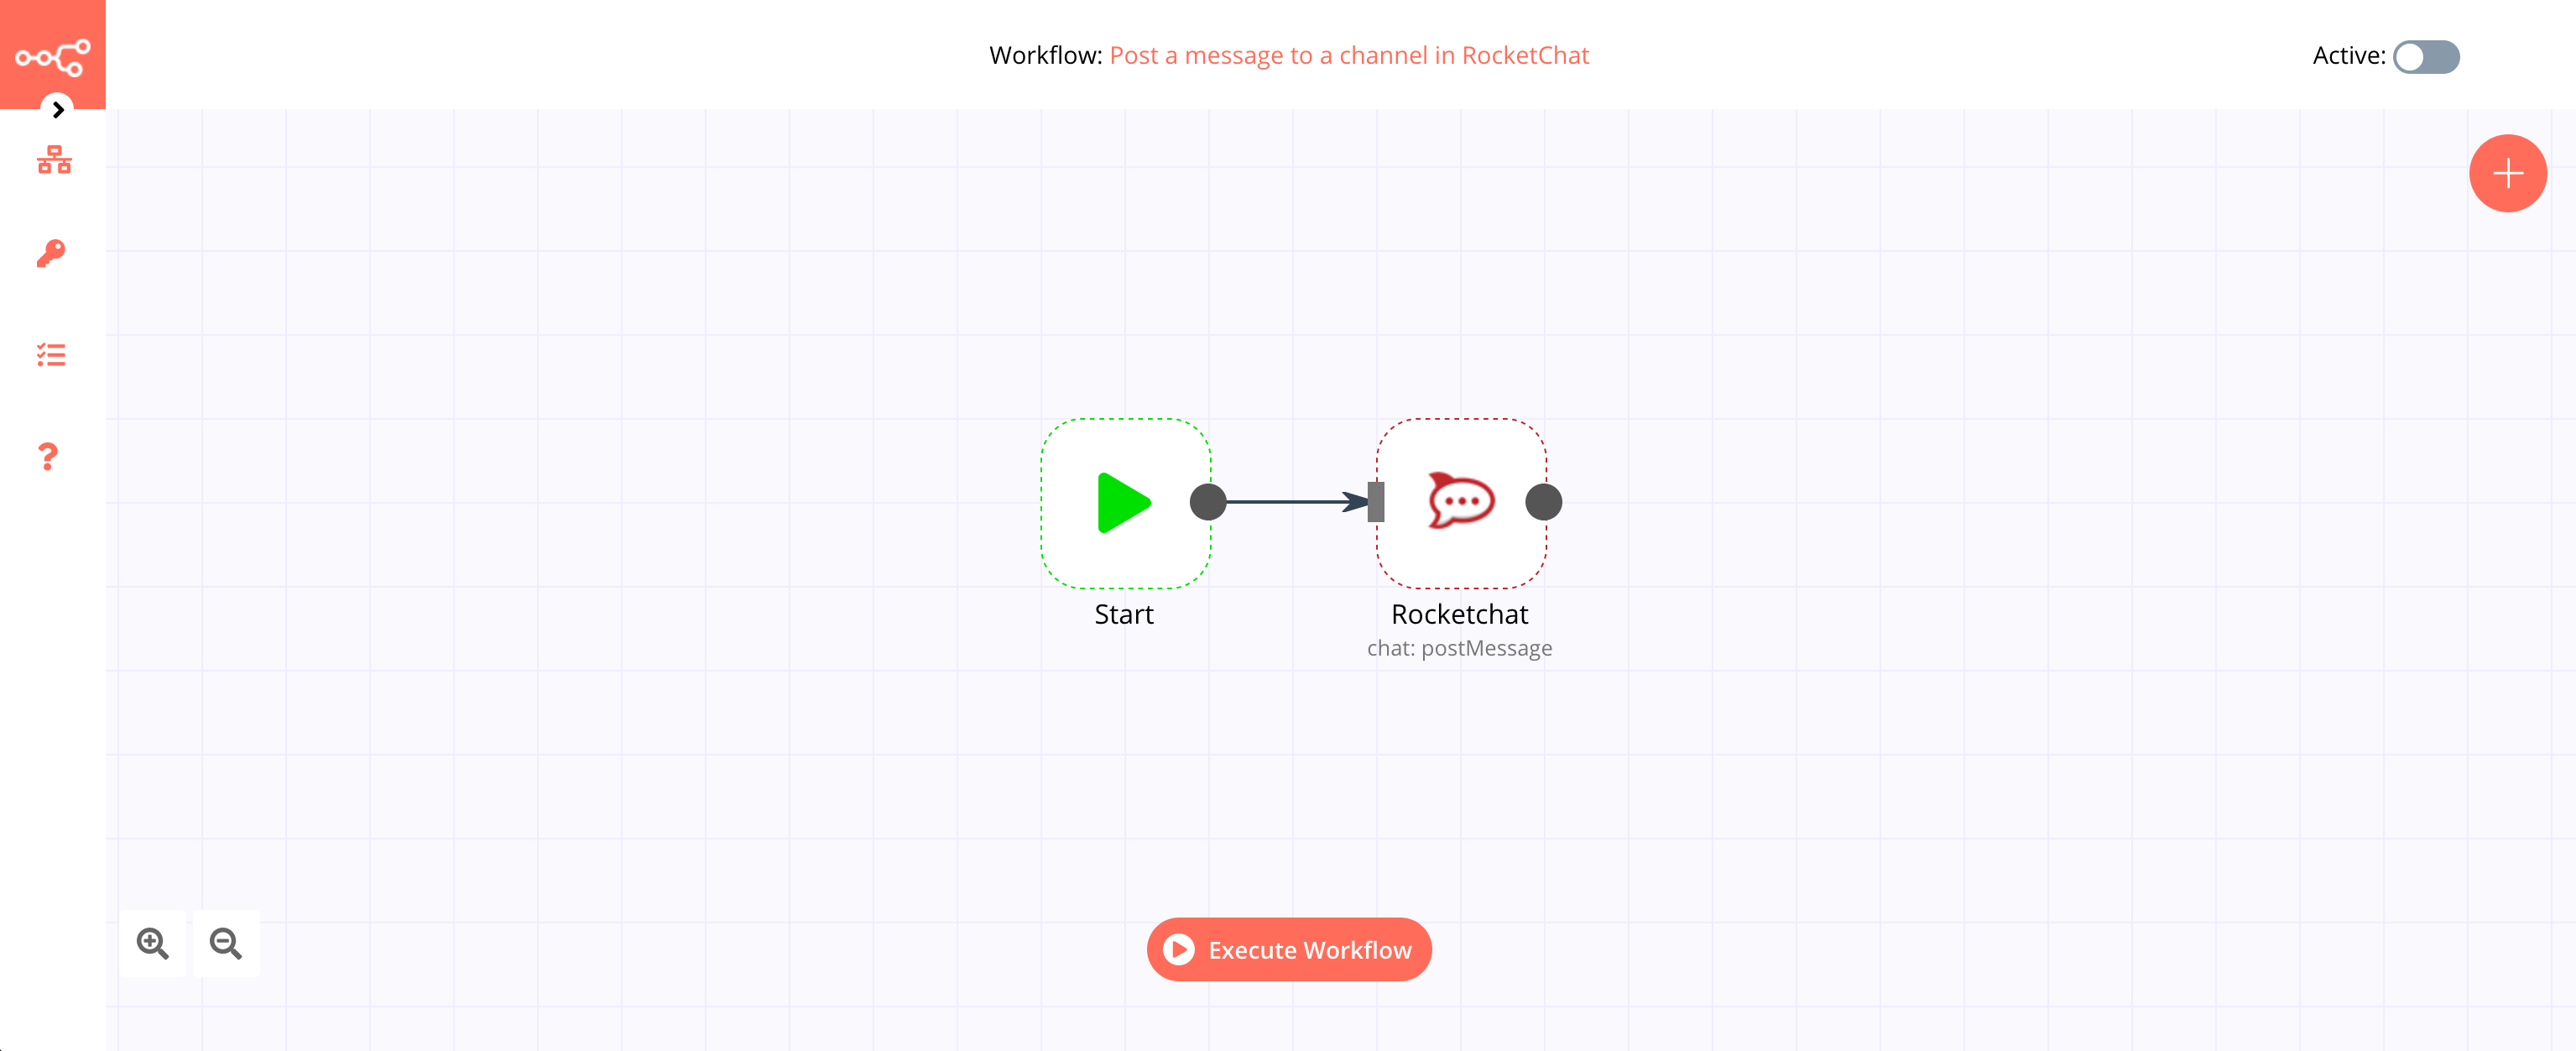 A workflow with the Rocket.Chat node